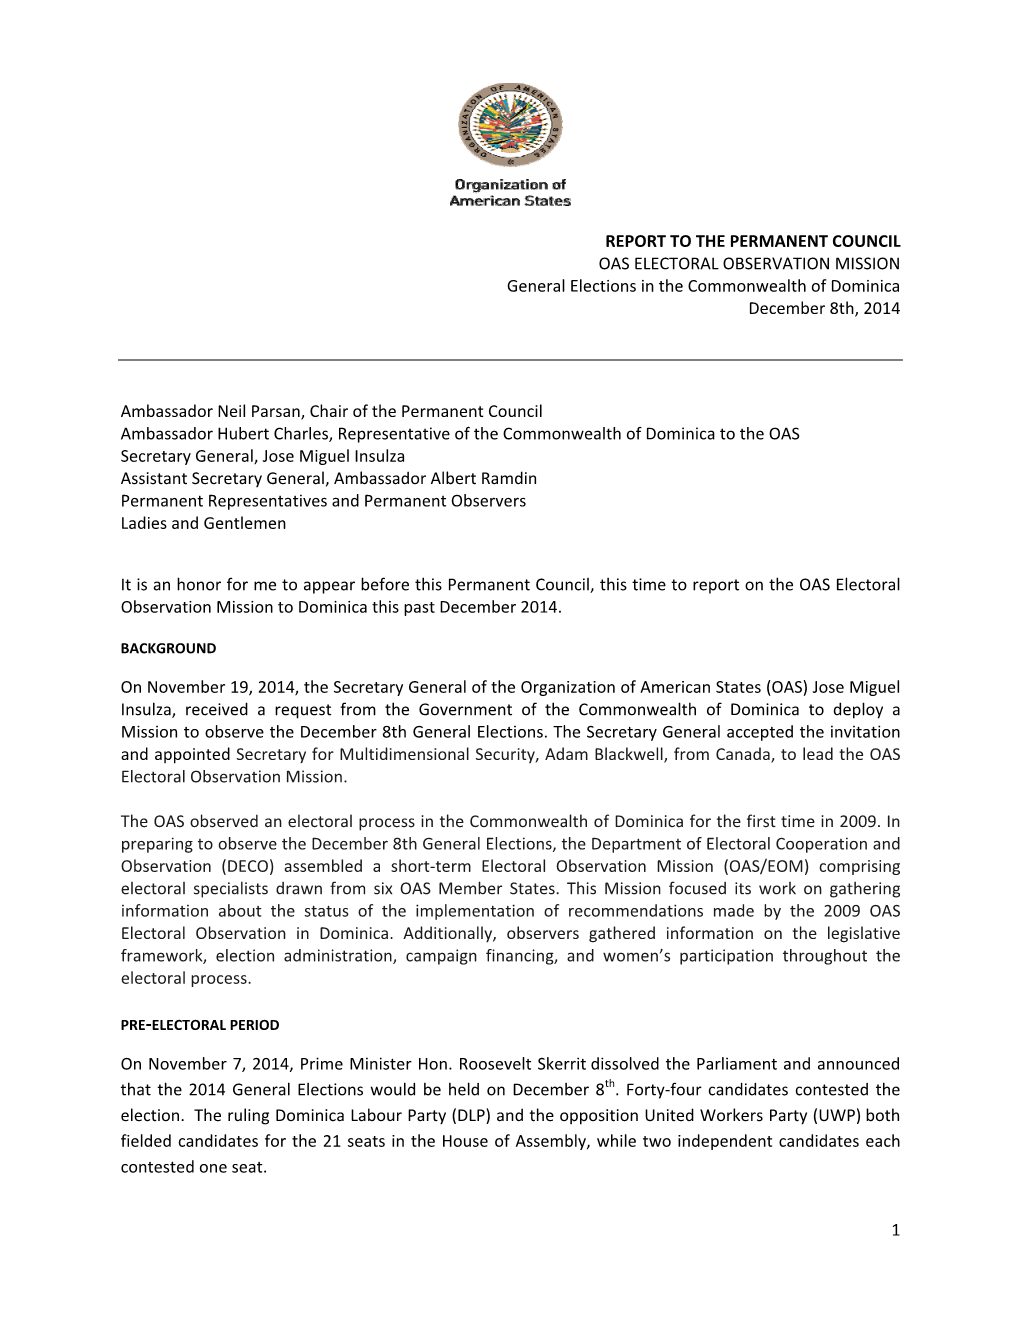 REPORT to the PERMANENT COUNCIL OAS ELECTORAL OBSERVATION MISSION General Elections in the Commonwealth of Dominica December 8Th, 2014